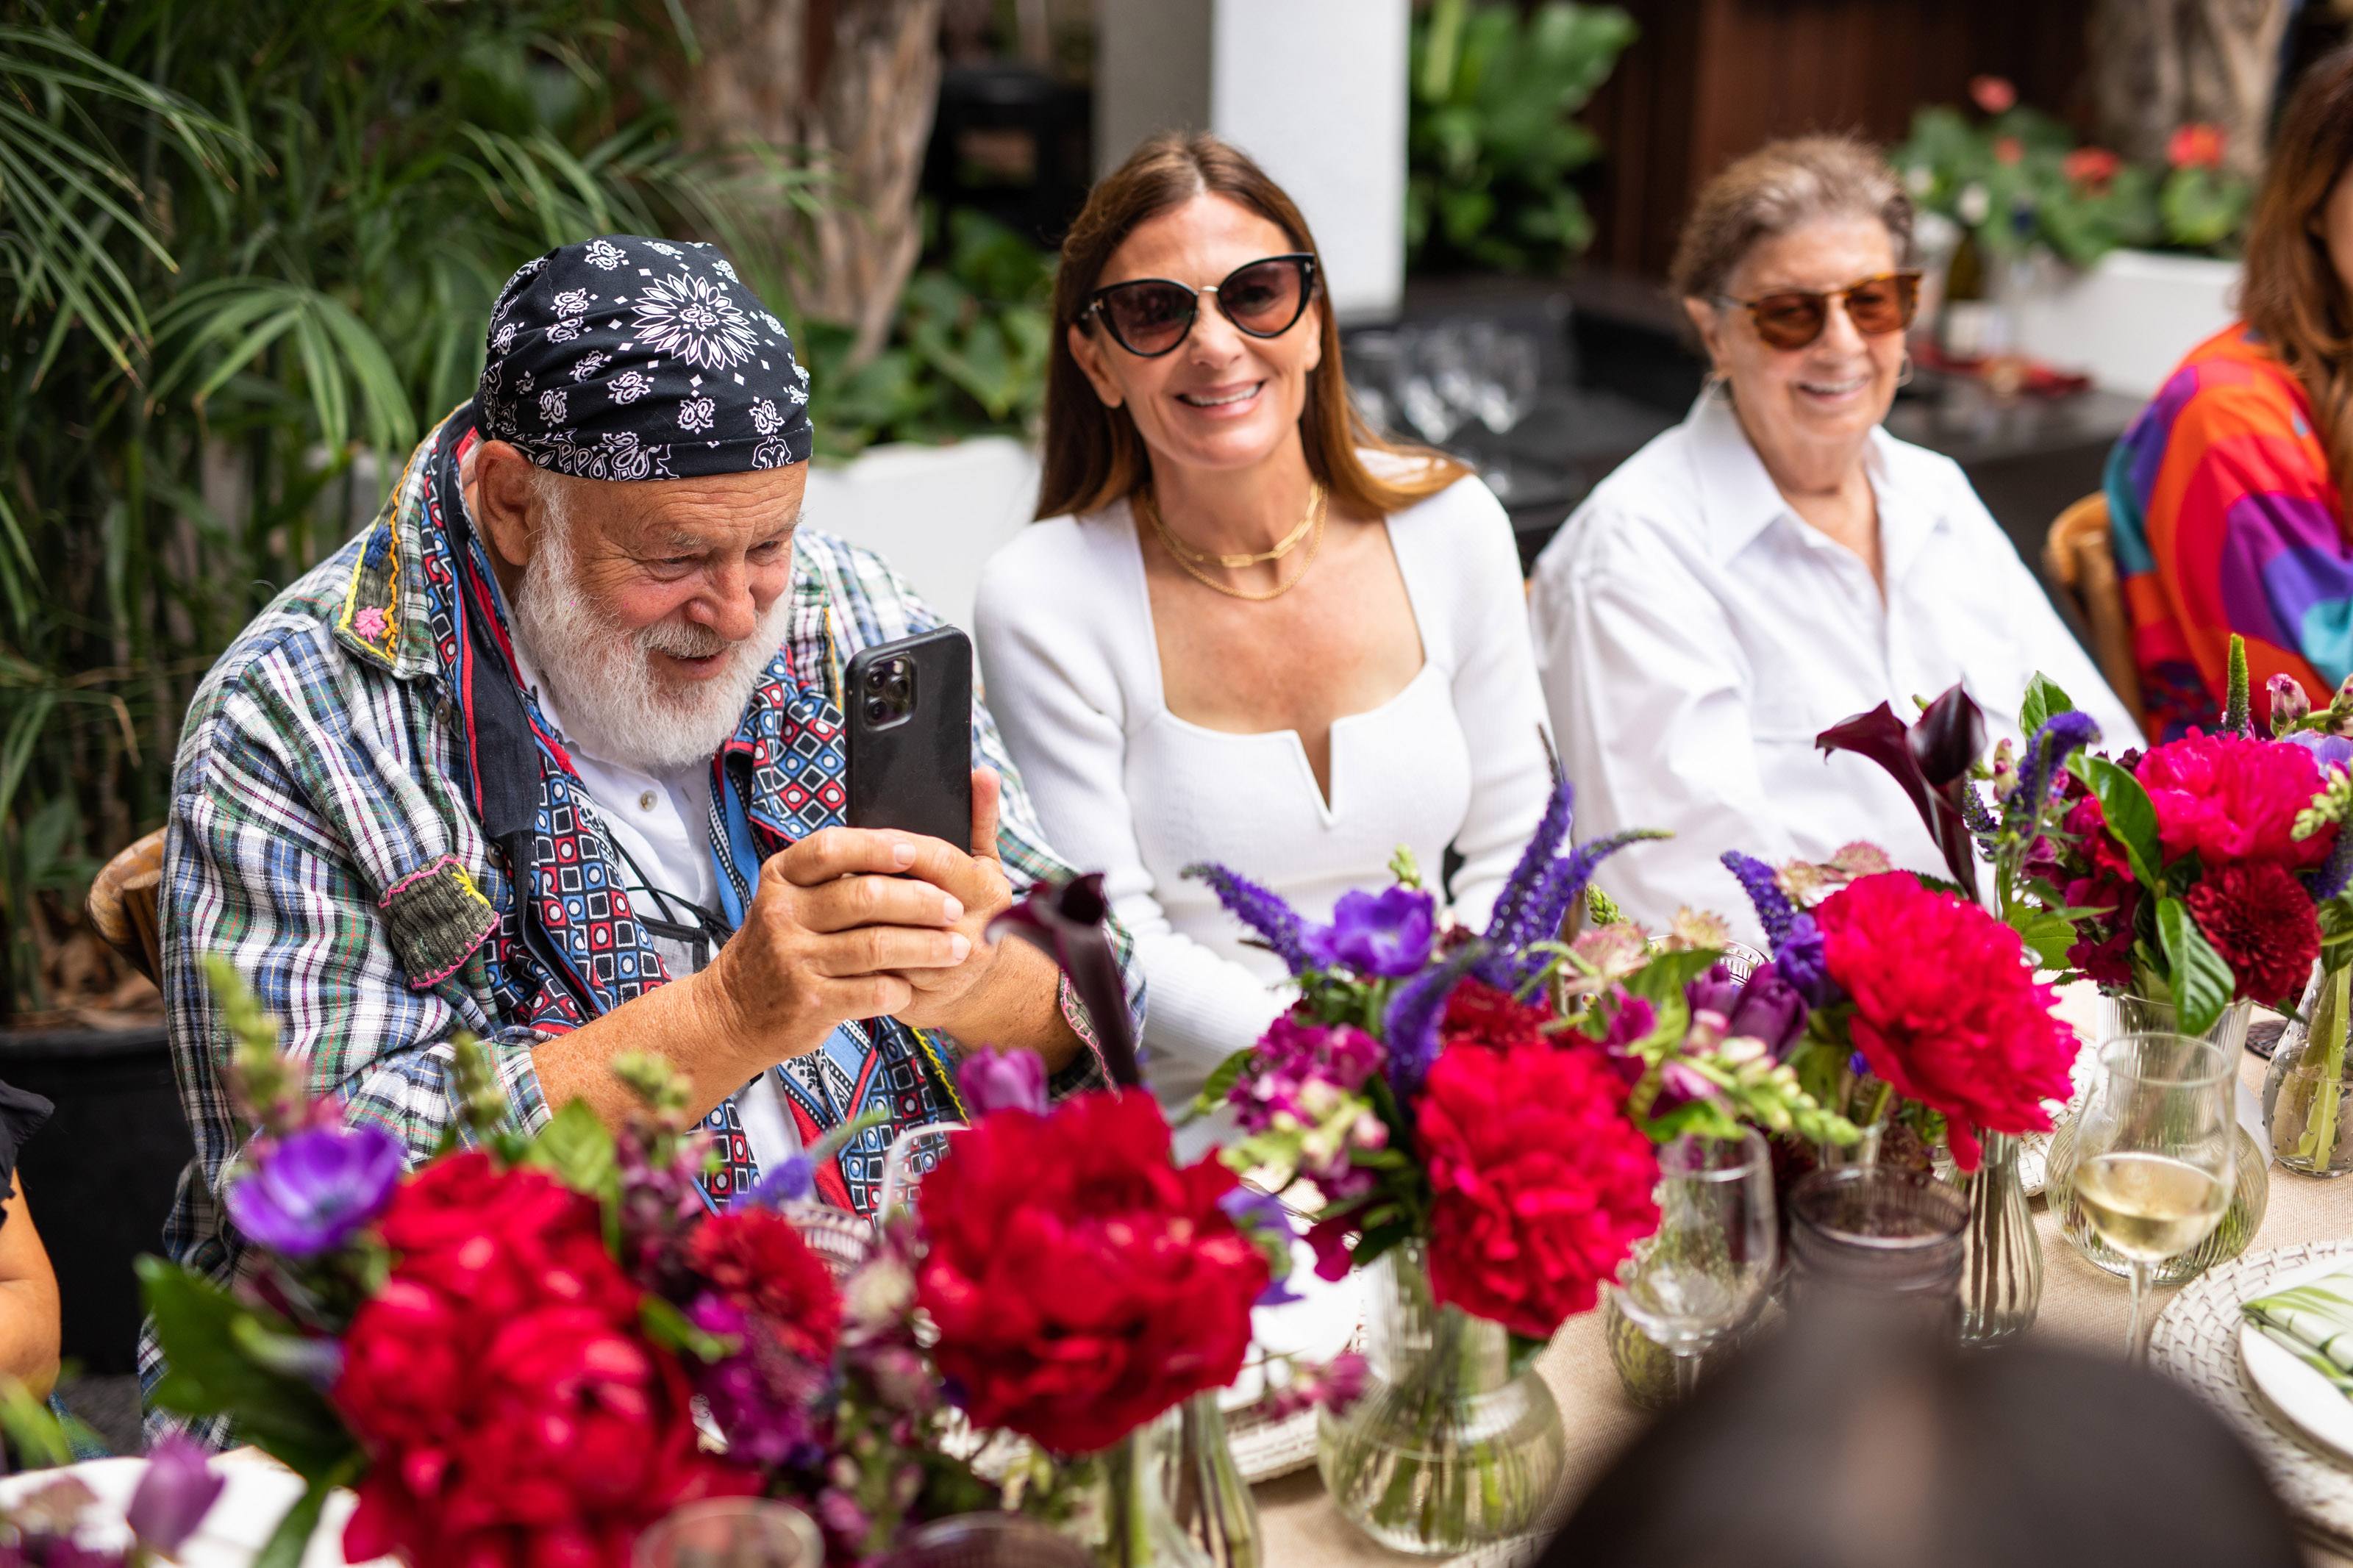 Bruce weber snaps a photo on his phone and Sarah harrelson smiles next to him